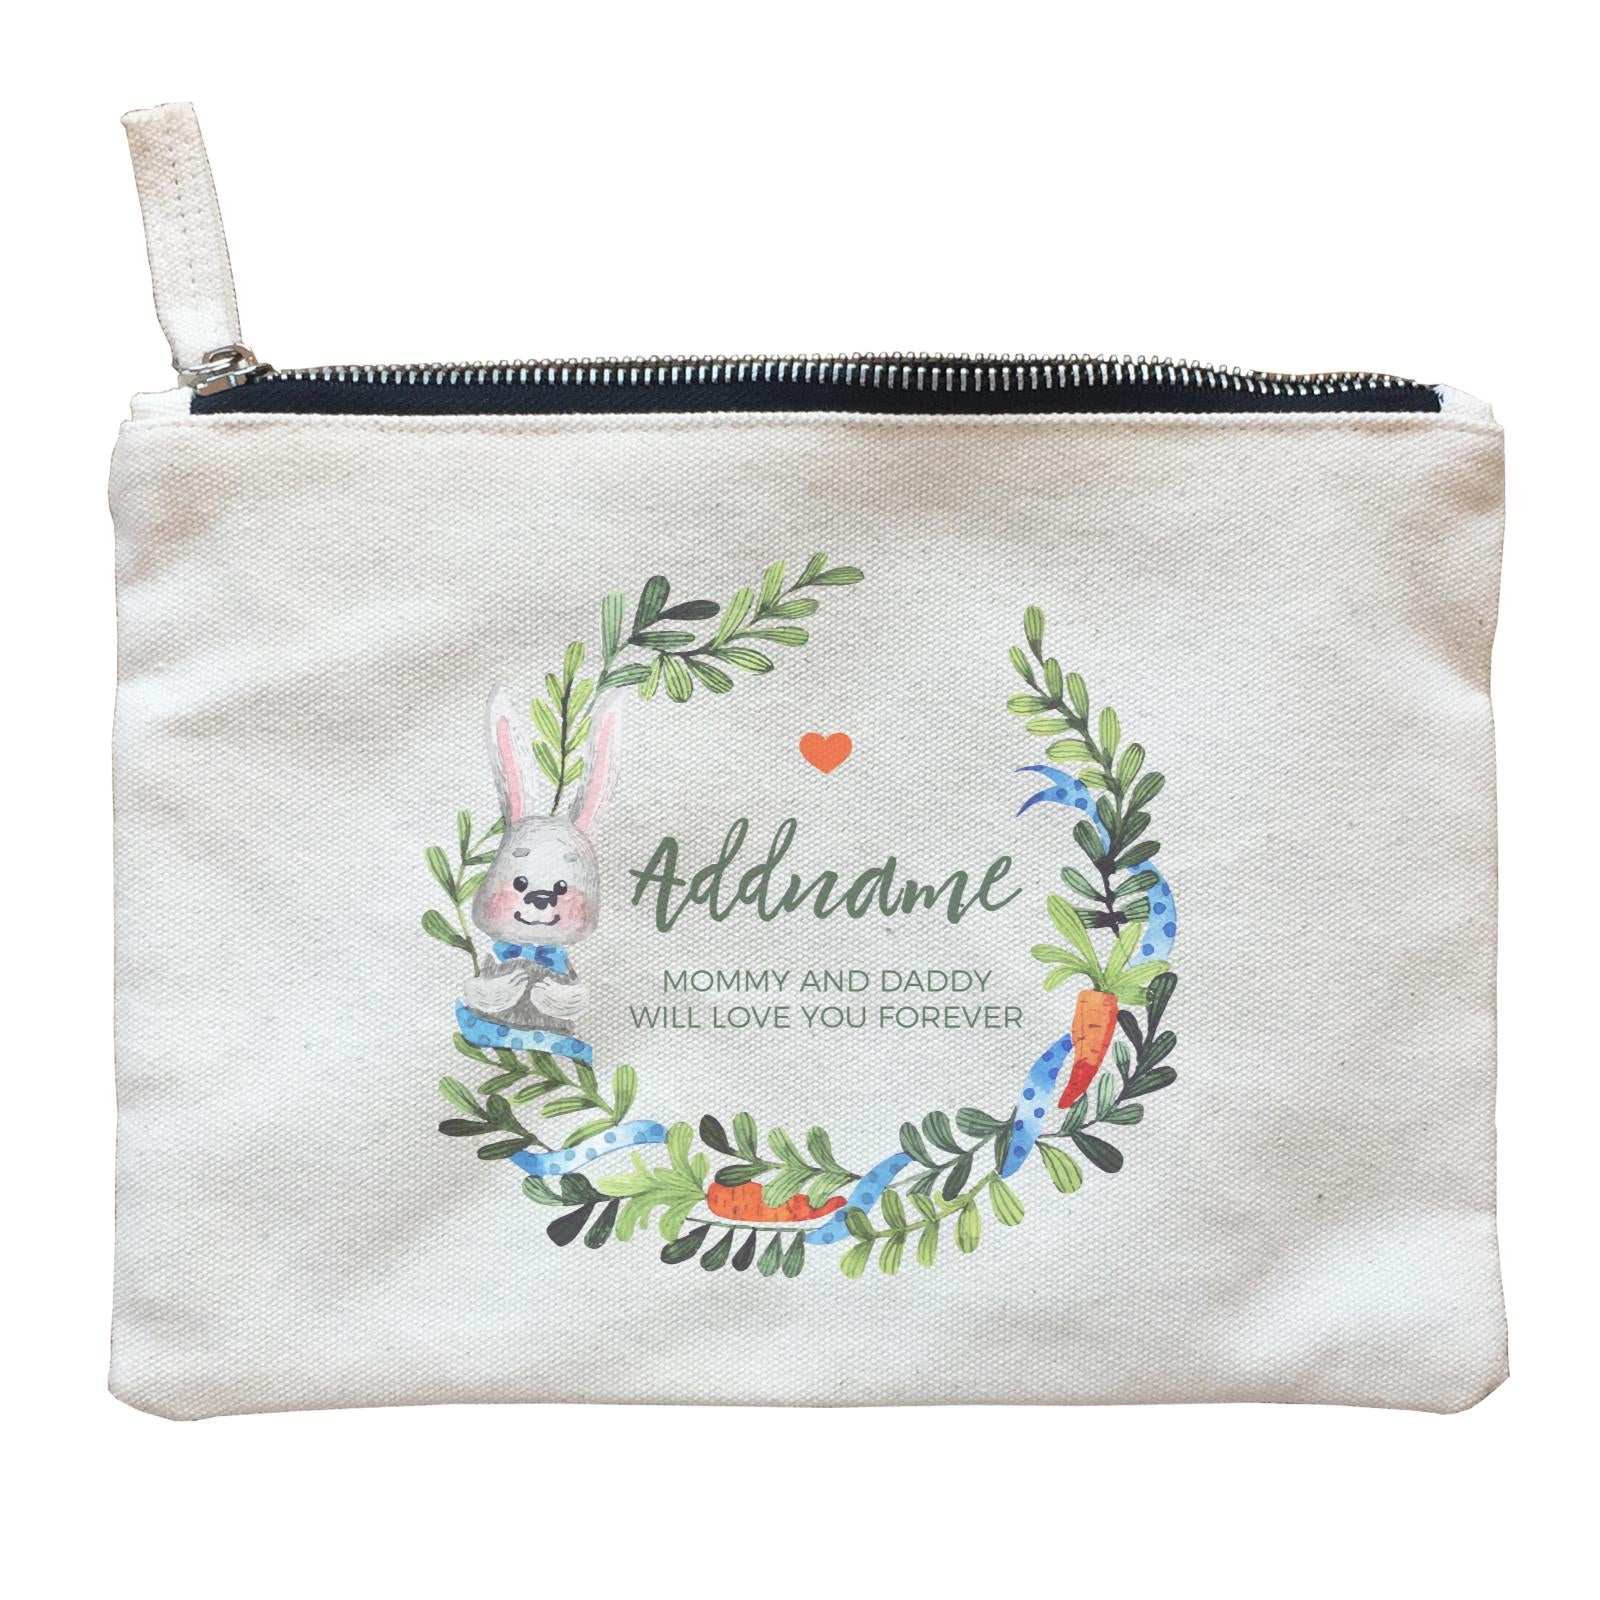 Watercolour Blue Rabbit and Carrots Wreath Personalizable with Name and Text Zipper Pouch